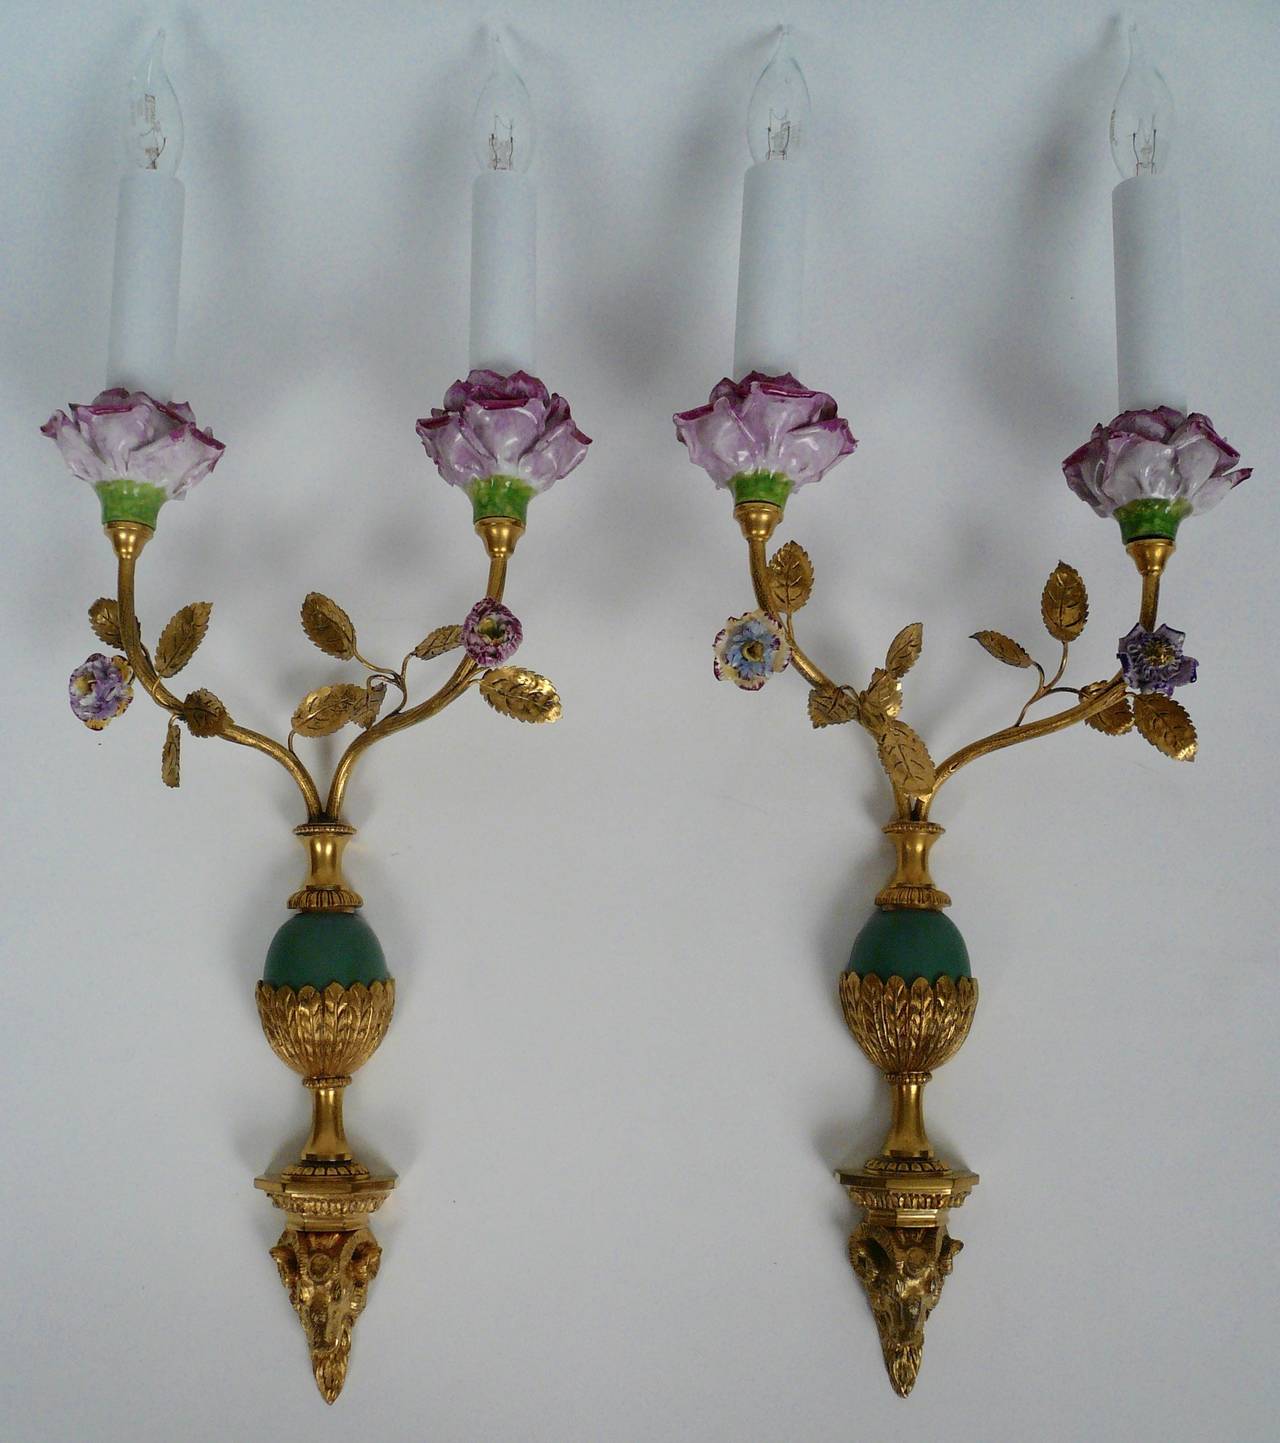 Pair of fine, two-light sconces by Edward F. Caldwell. The ram's head form bracket supports an urn shaped vase issuing curved stems that culminate in porcelain flowers, and rose form candle cups.